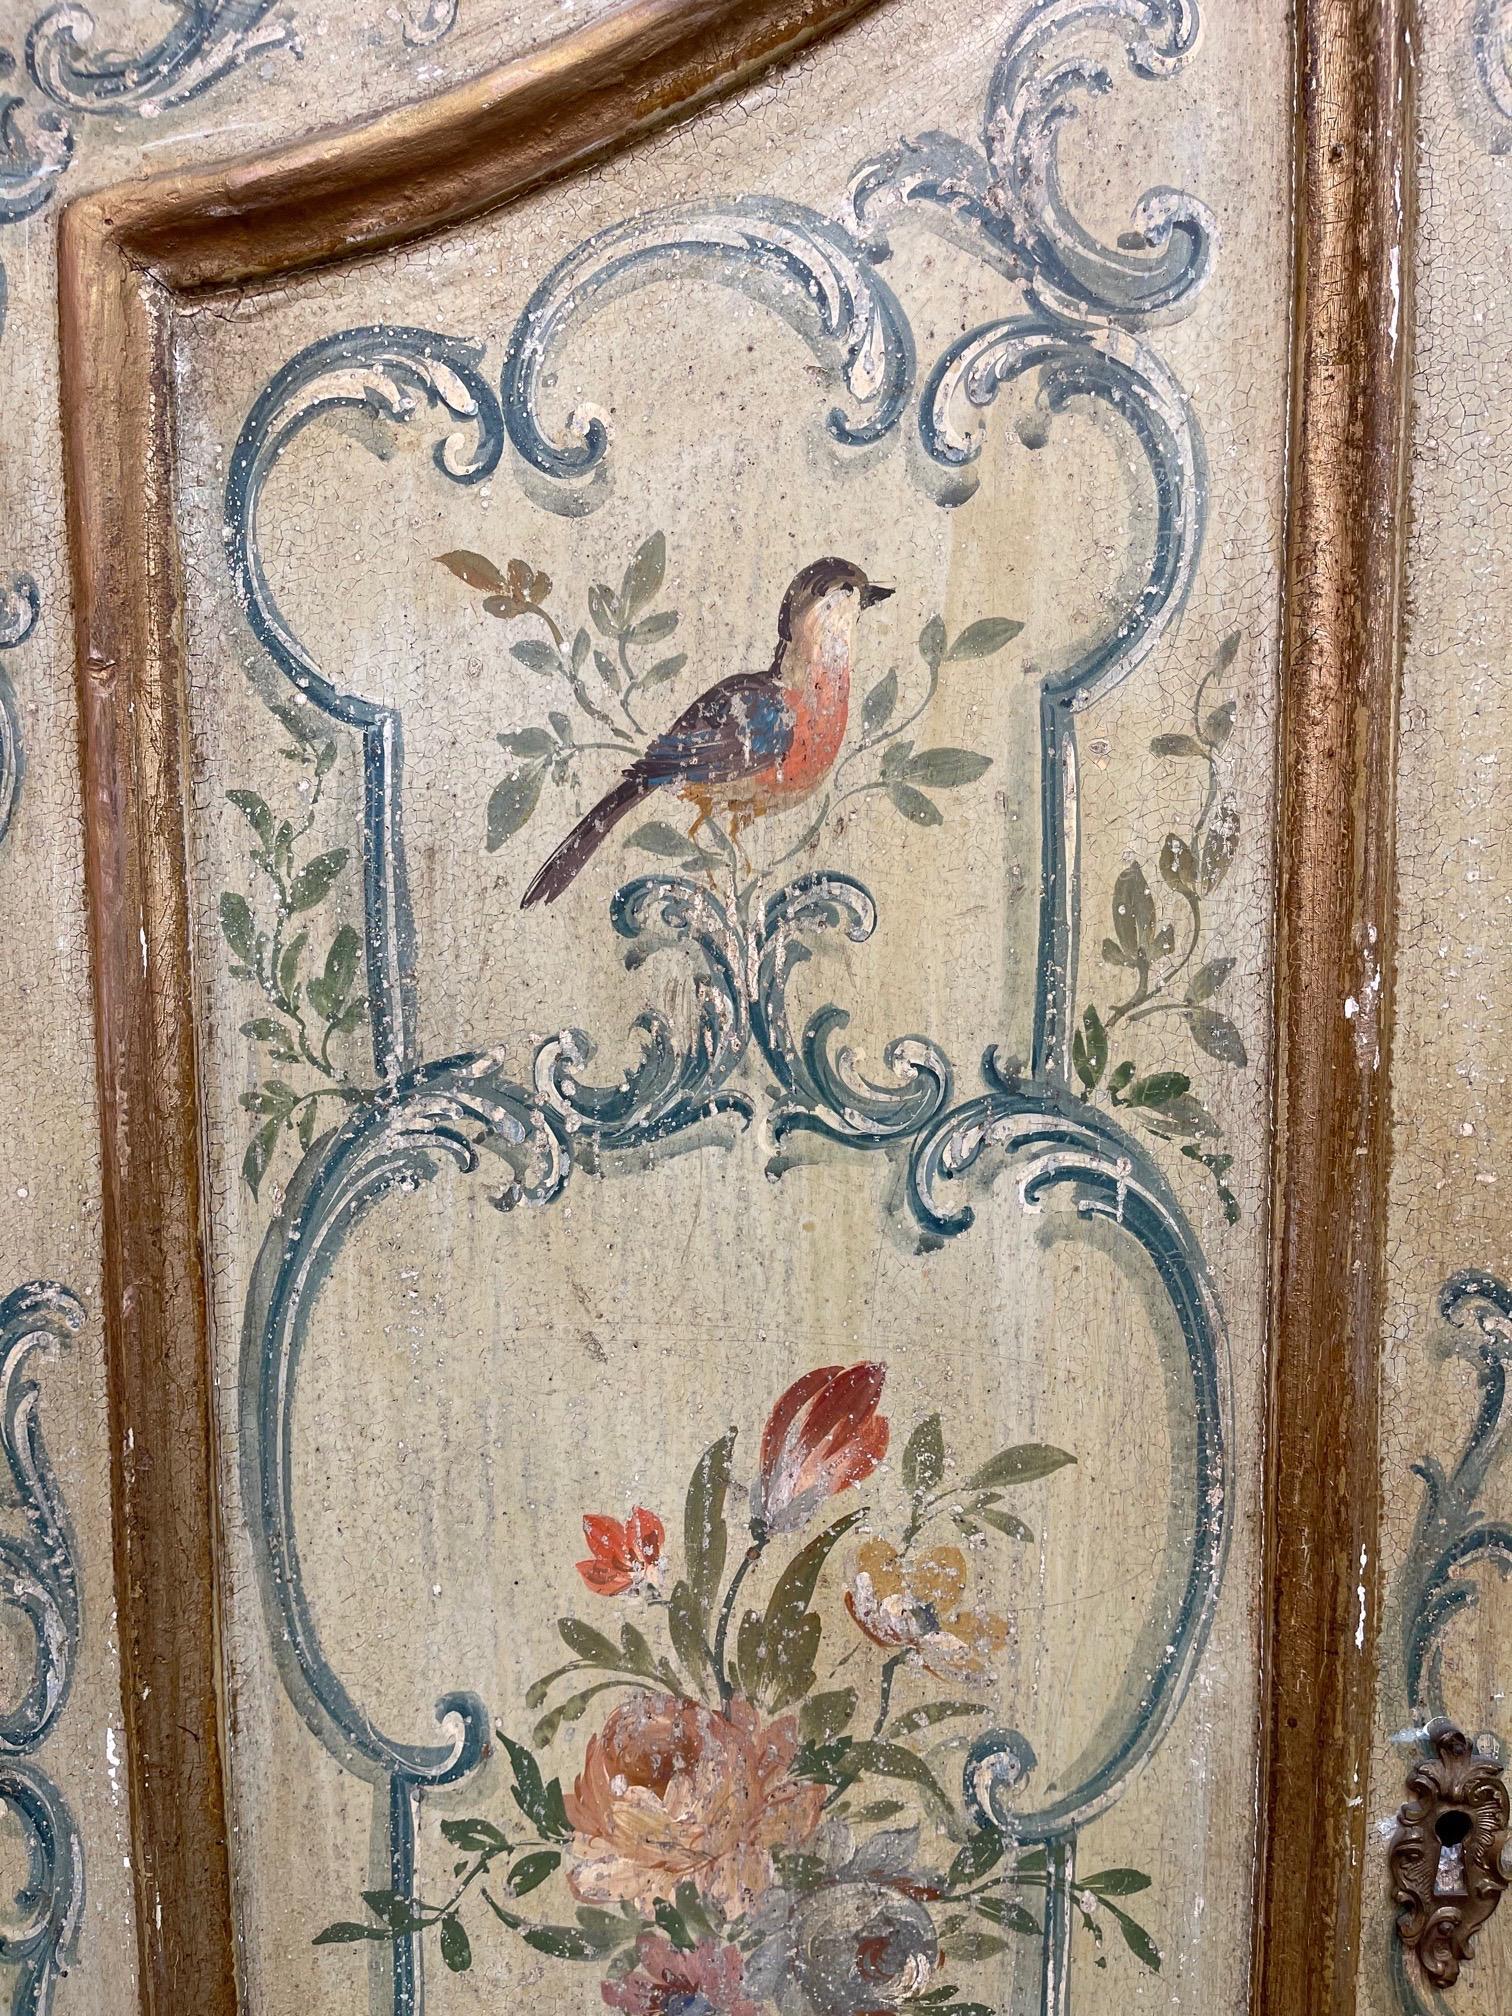 Very special antique Italian hand painted secretary including beautiful images of flowers and birds. Lots of storage including shelves at the top (not pictured) and drawers at the bottom. A true work of art that is sure to impress!